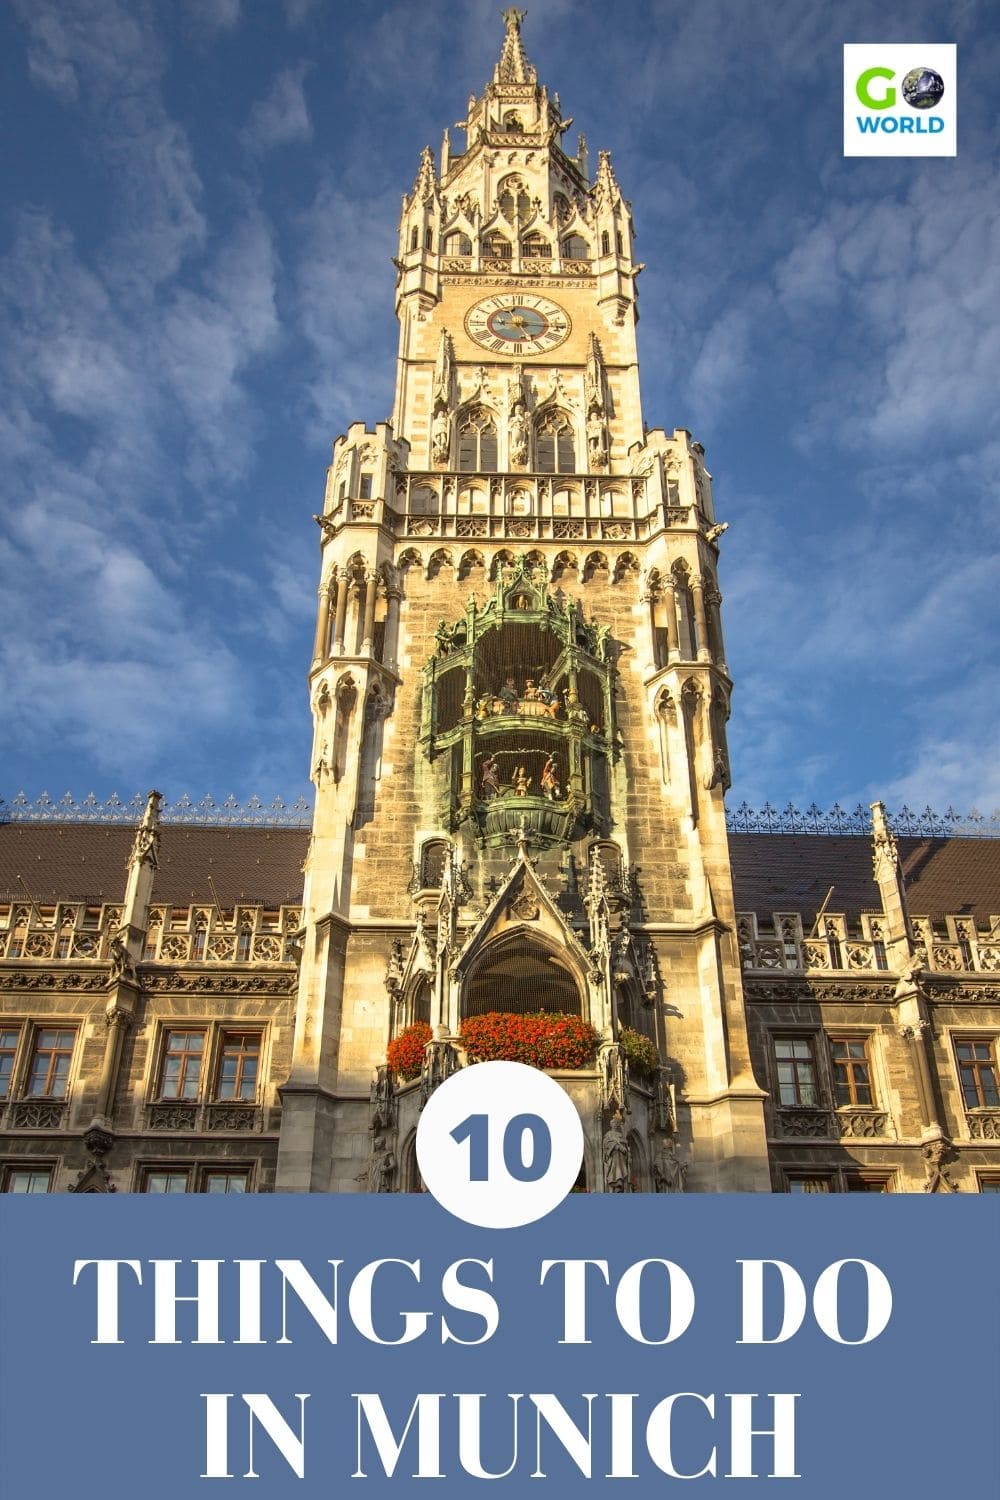 There are more things to do in Munich, Germany than drink beer at Oktoberfest. Discover the top museums, sights, sports, food and activities. #travelingermany #munichgermany